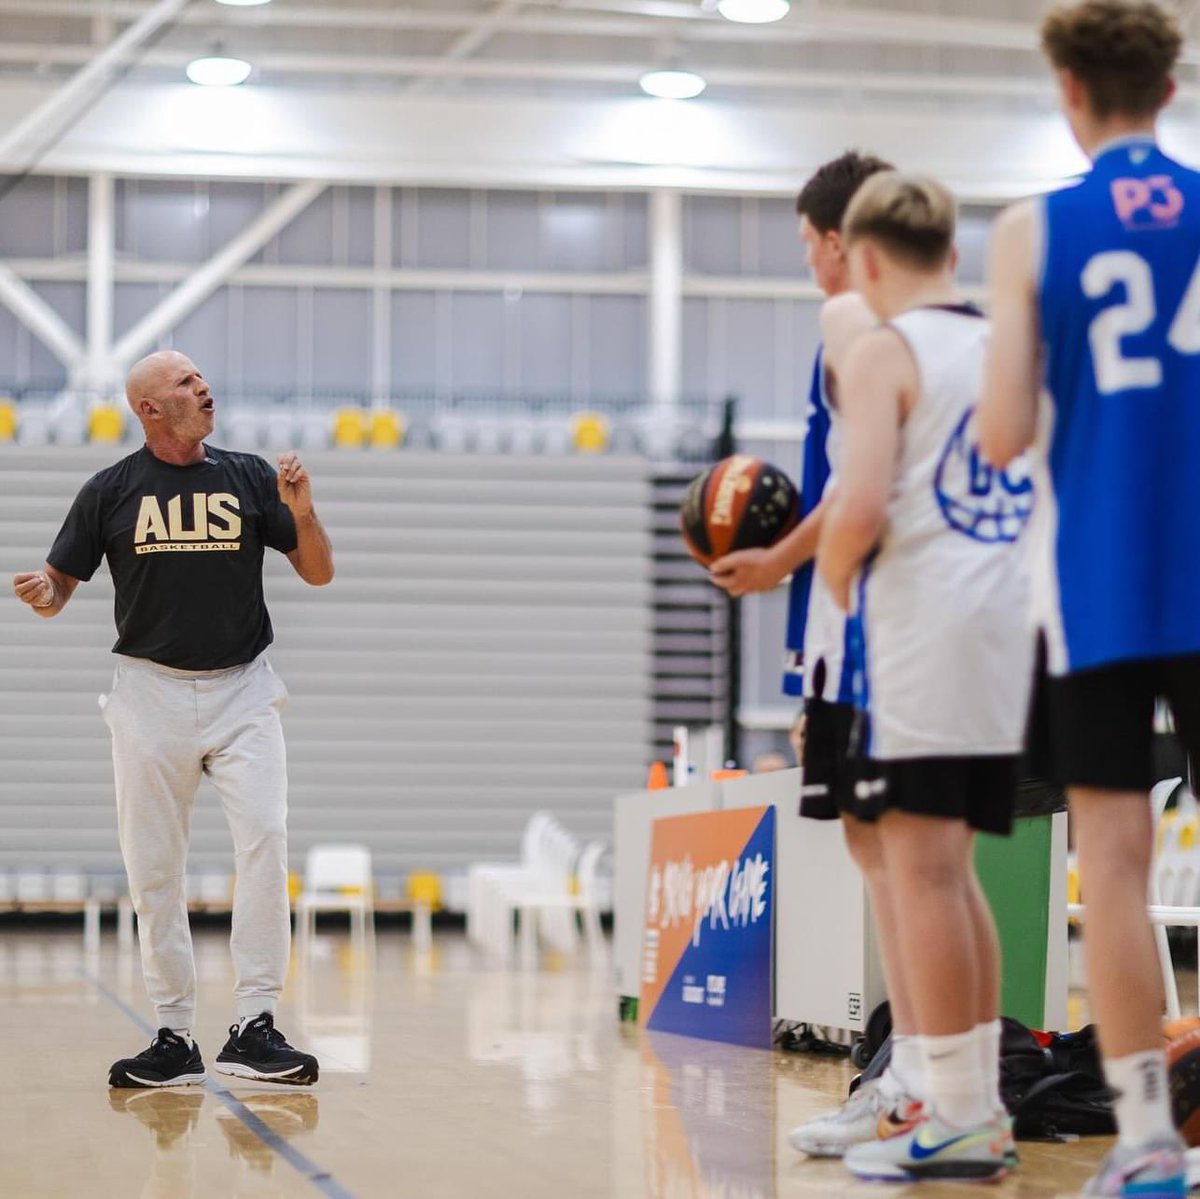 You don’t see this every day! 👀 

Sandy and Goorj came together to drop some coaching gems on the GC this week at the School Champs.

#WeAreBasketball #ASC23